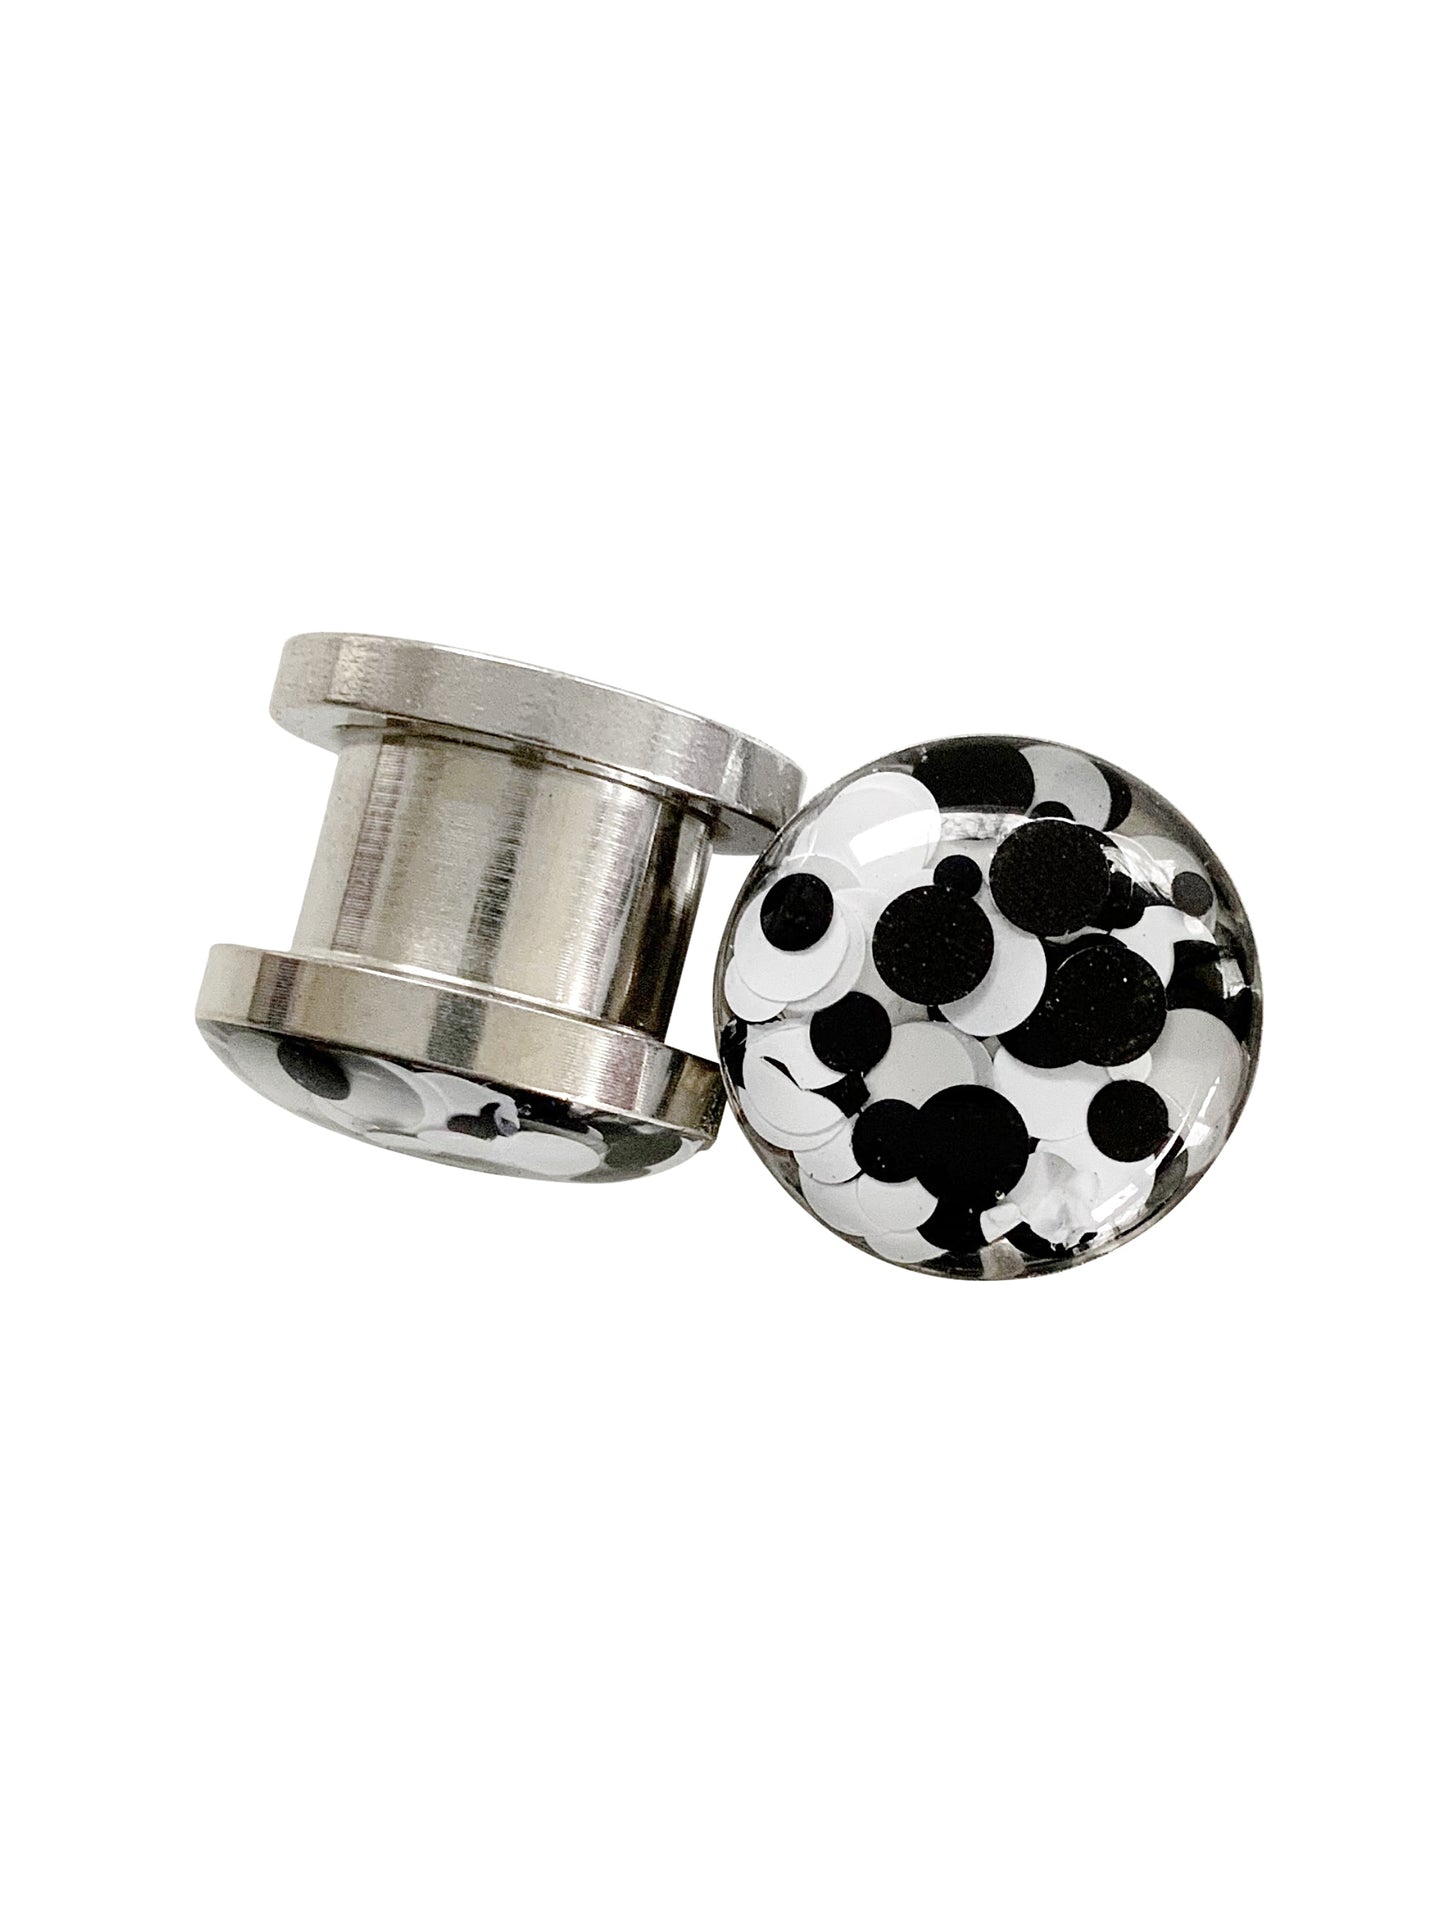 Black and White Party Bubble Plugs